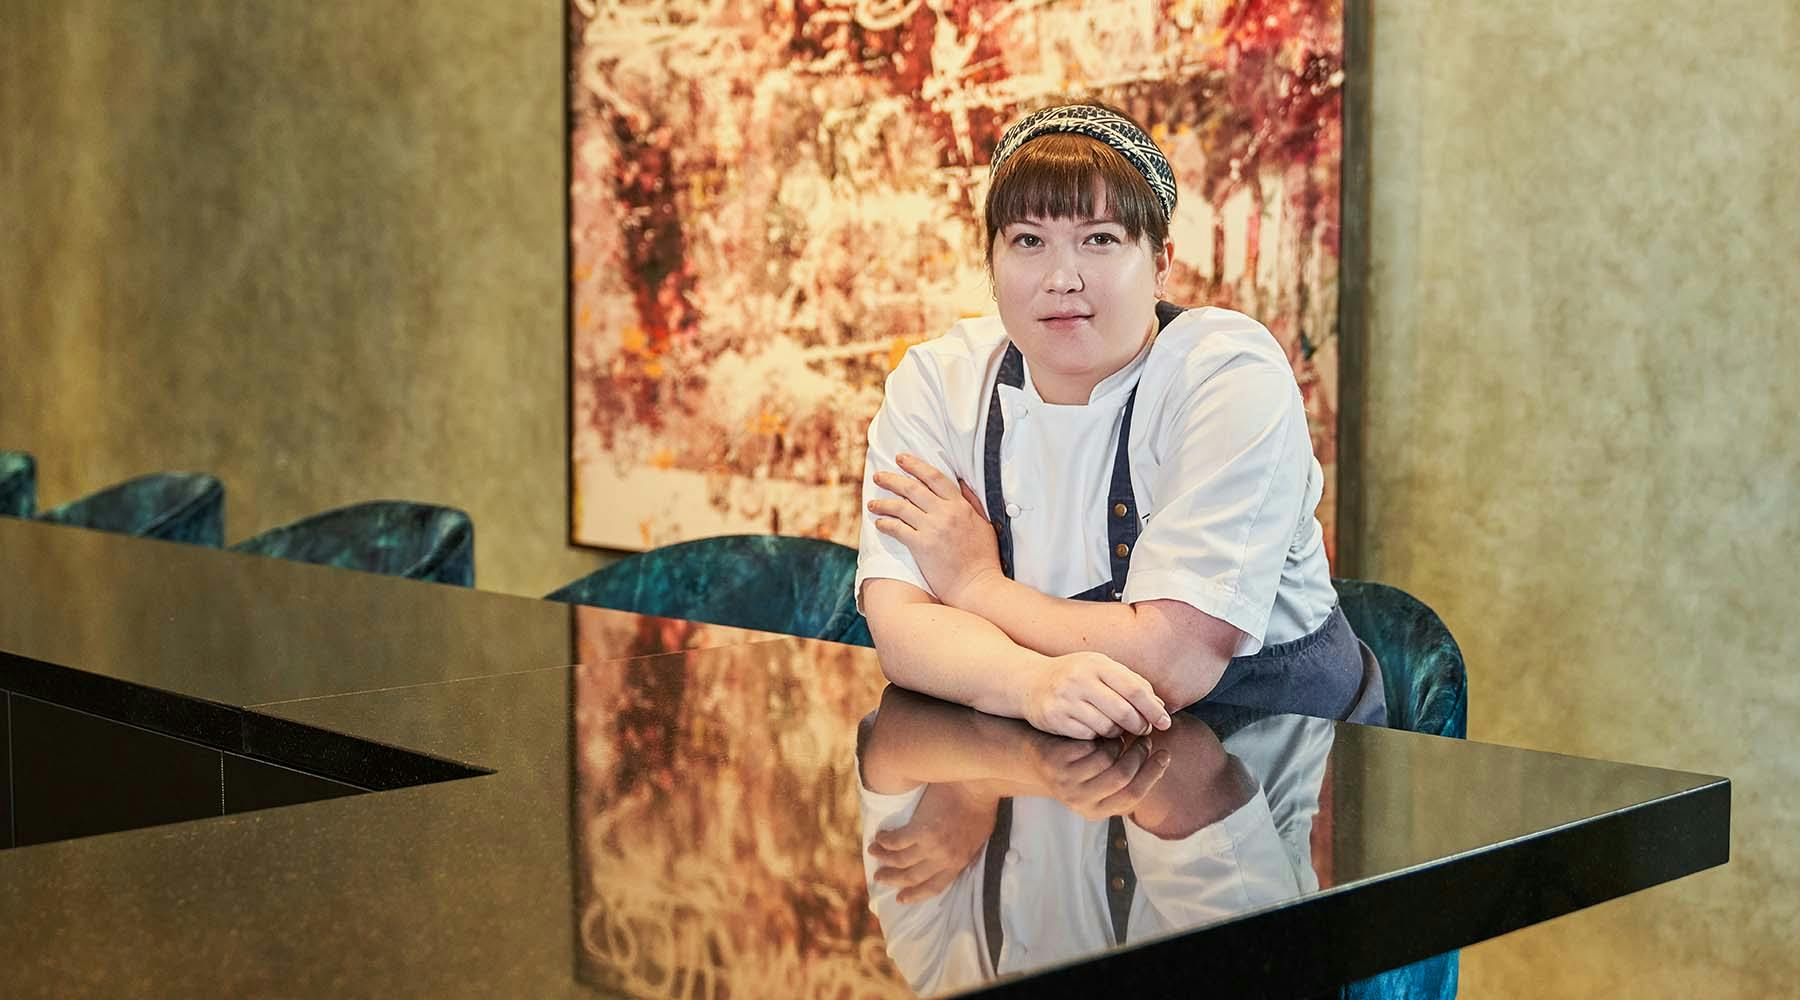 This Chef Is Making Japanese Food Her Own Way